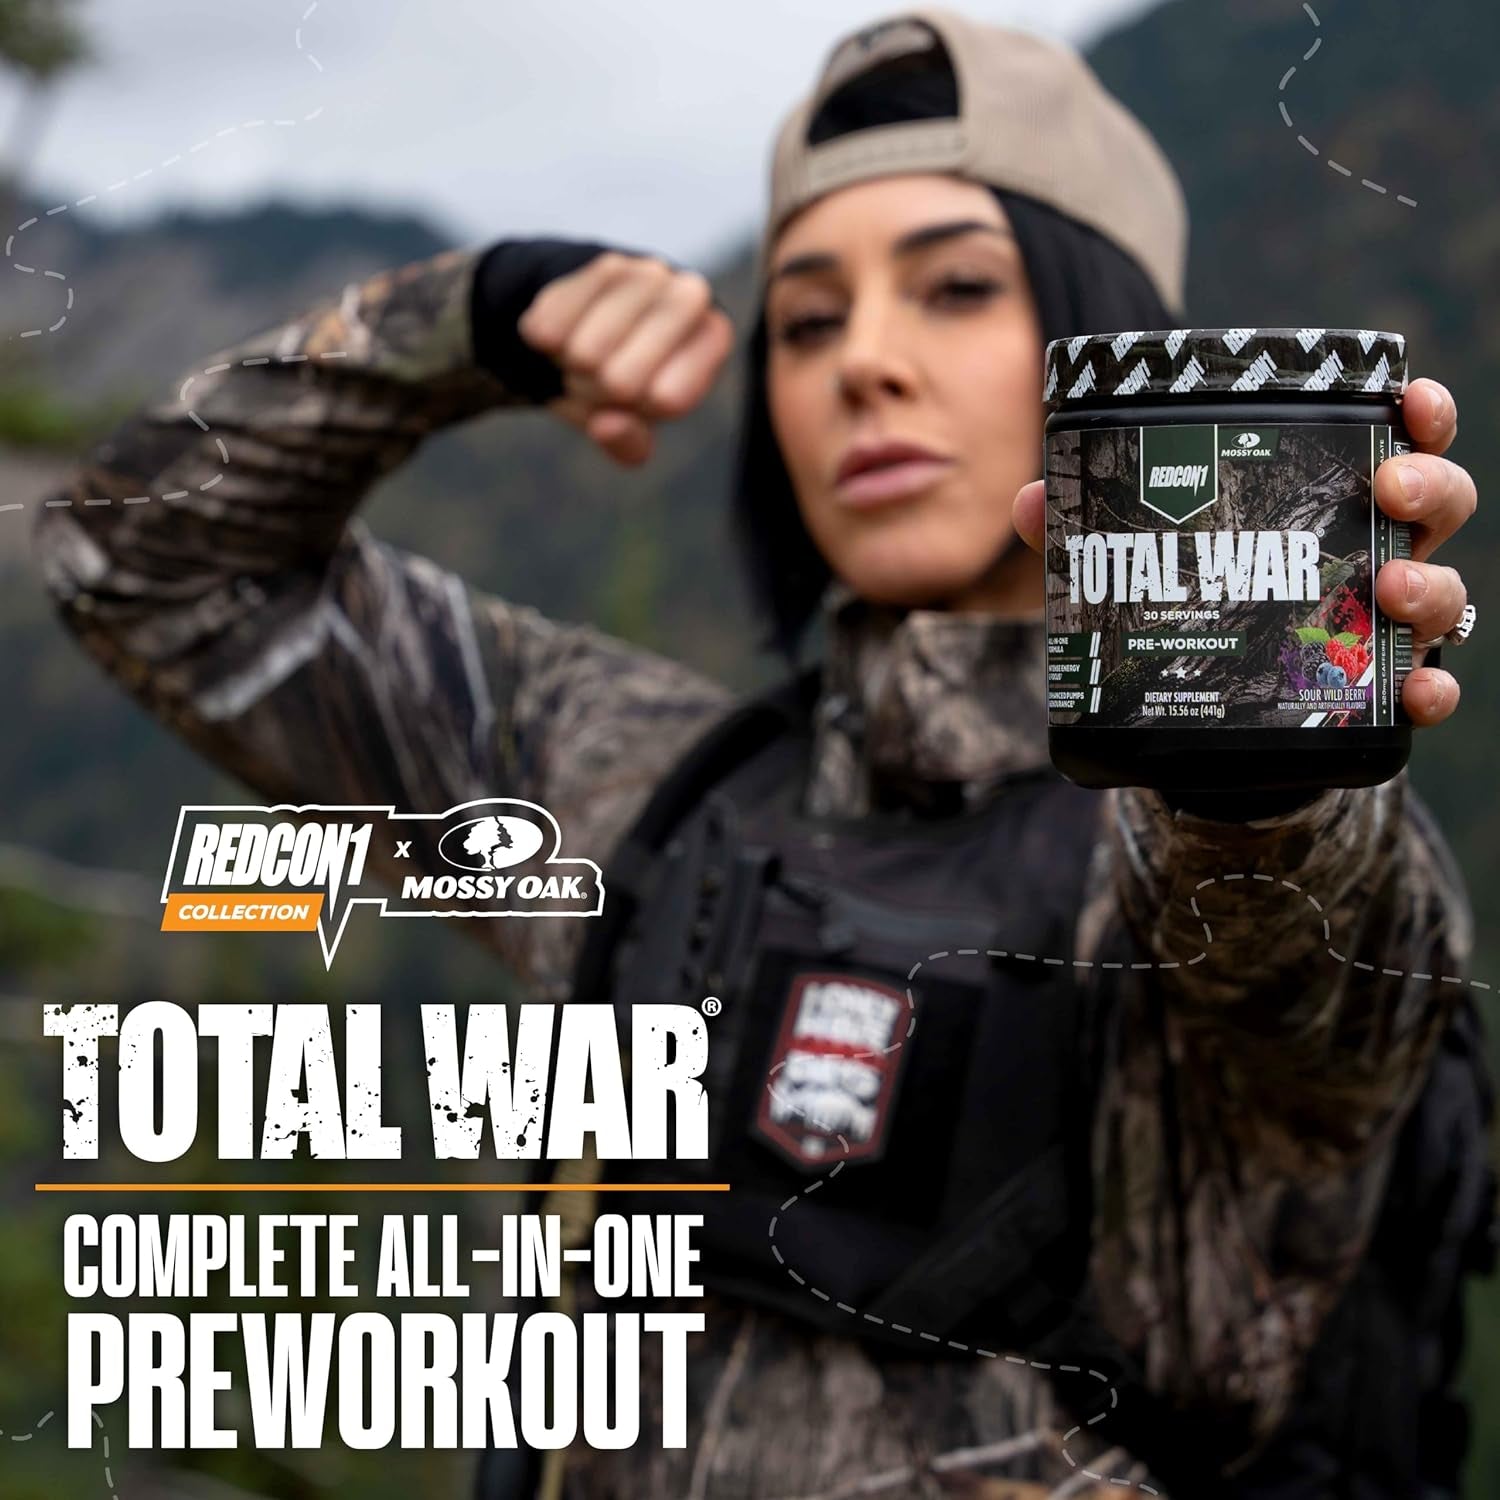 Total War Pre-Workout 30 Servings Sour Wild Berry